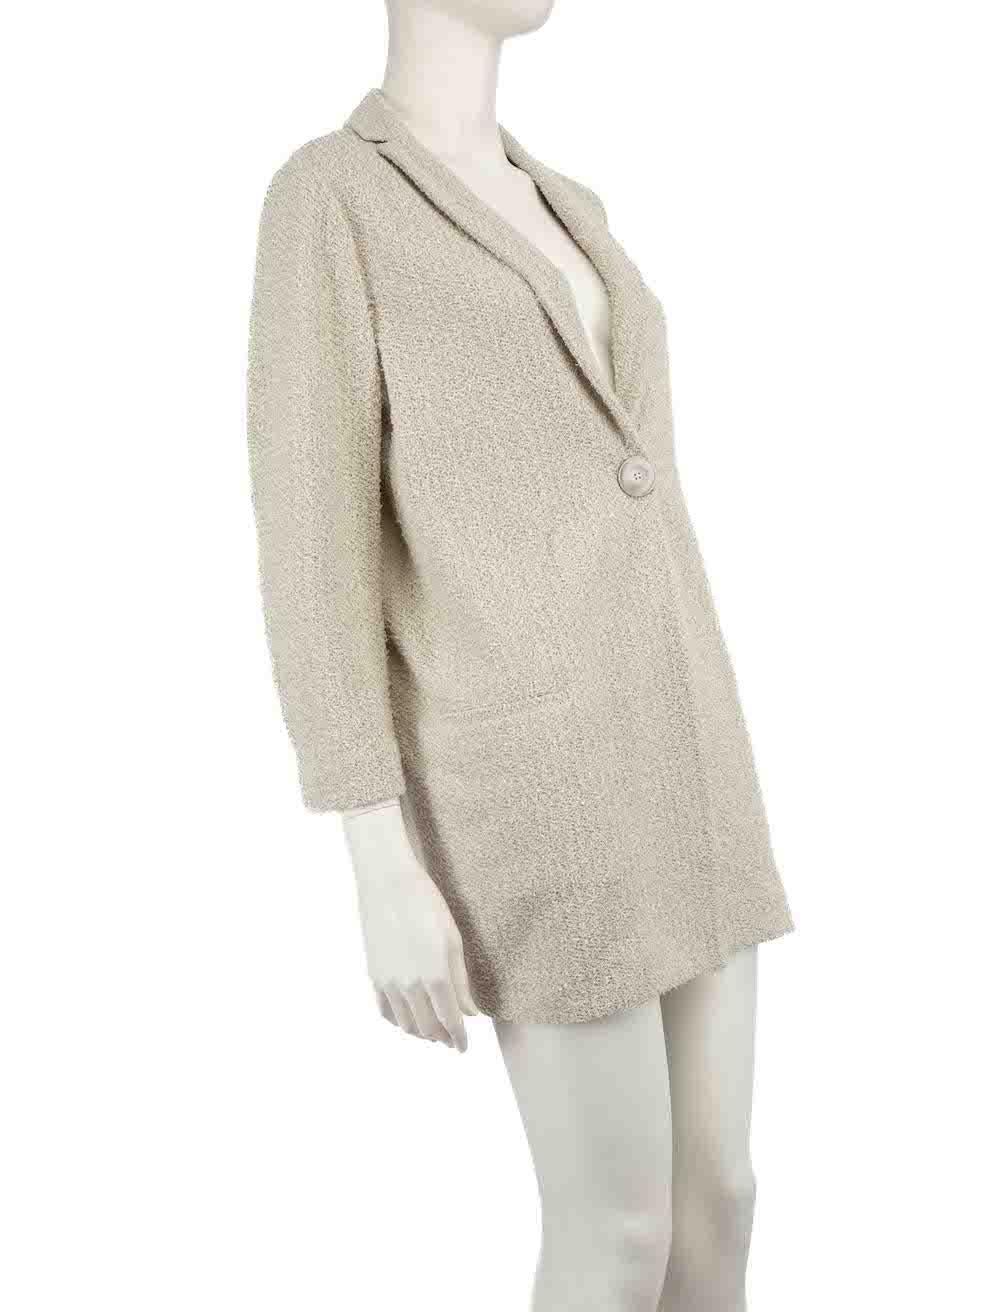 CONDITION is Very good. Hardly any visible wear to coat is evident on this used Fabiana Filippi designer resale item.
 
 
 
 Details
 
 
 Grey
 
 Cotton
 
 Coat
 
 Snap button fastening
 
 Single breasted
 
 2x Front pockets
 
 
 
 
 
 Made in